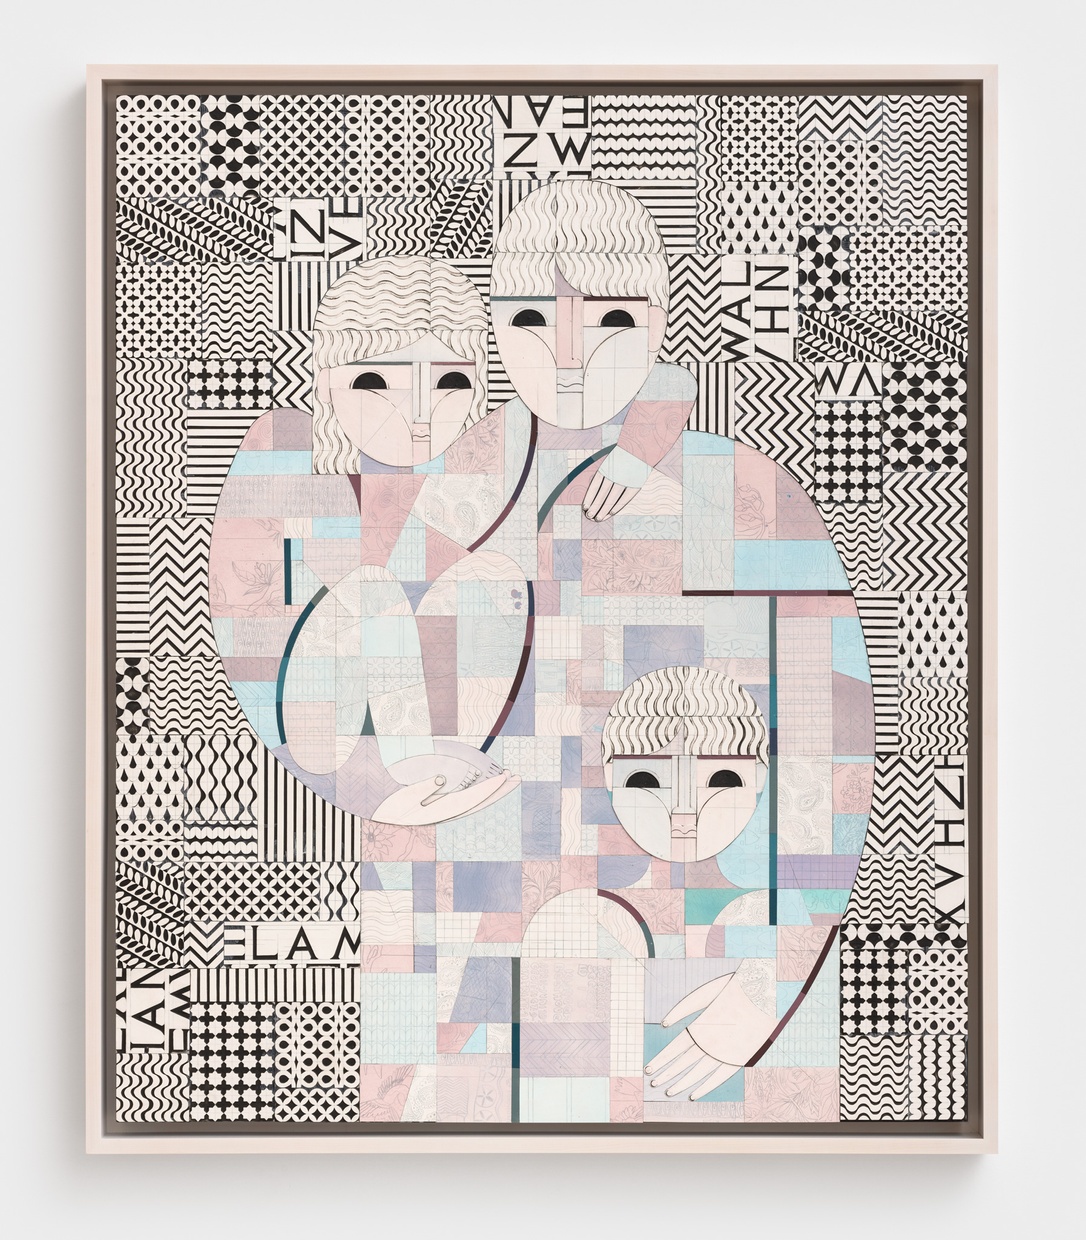 A painting of three abstract figures, one adult with two children, formed from a grid of pastel shapes against a black and white geometric background.